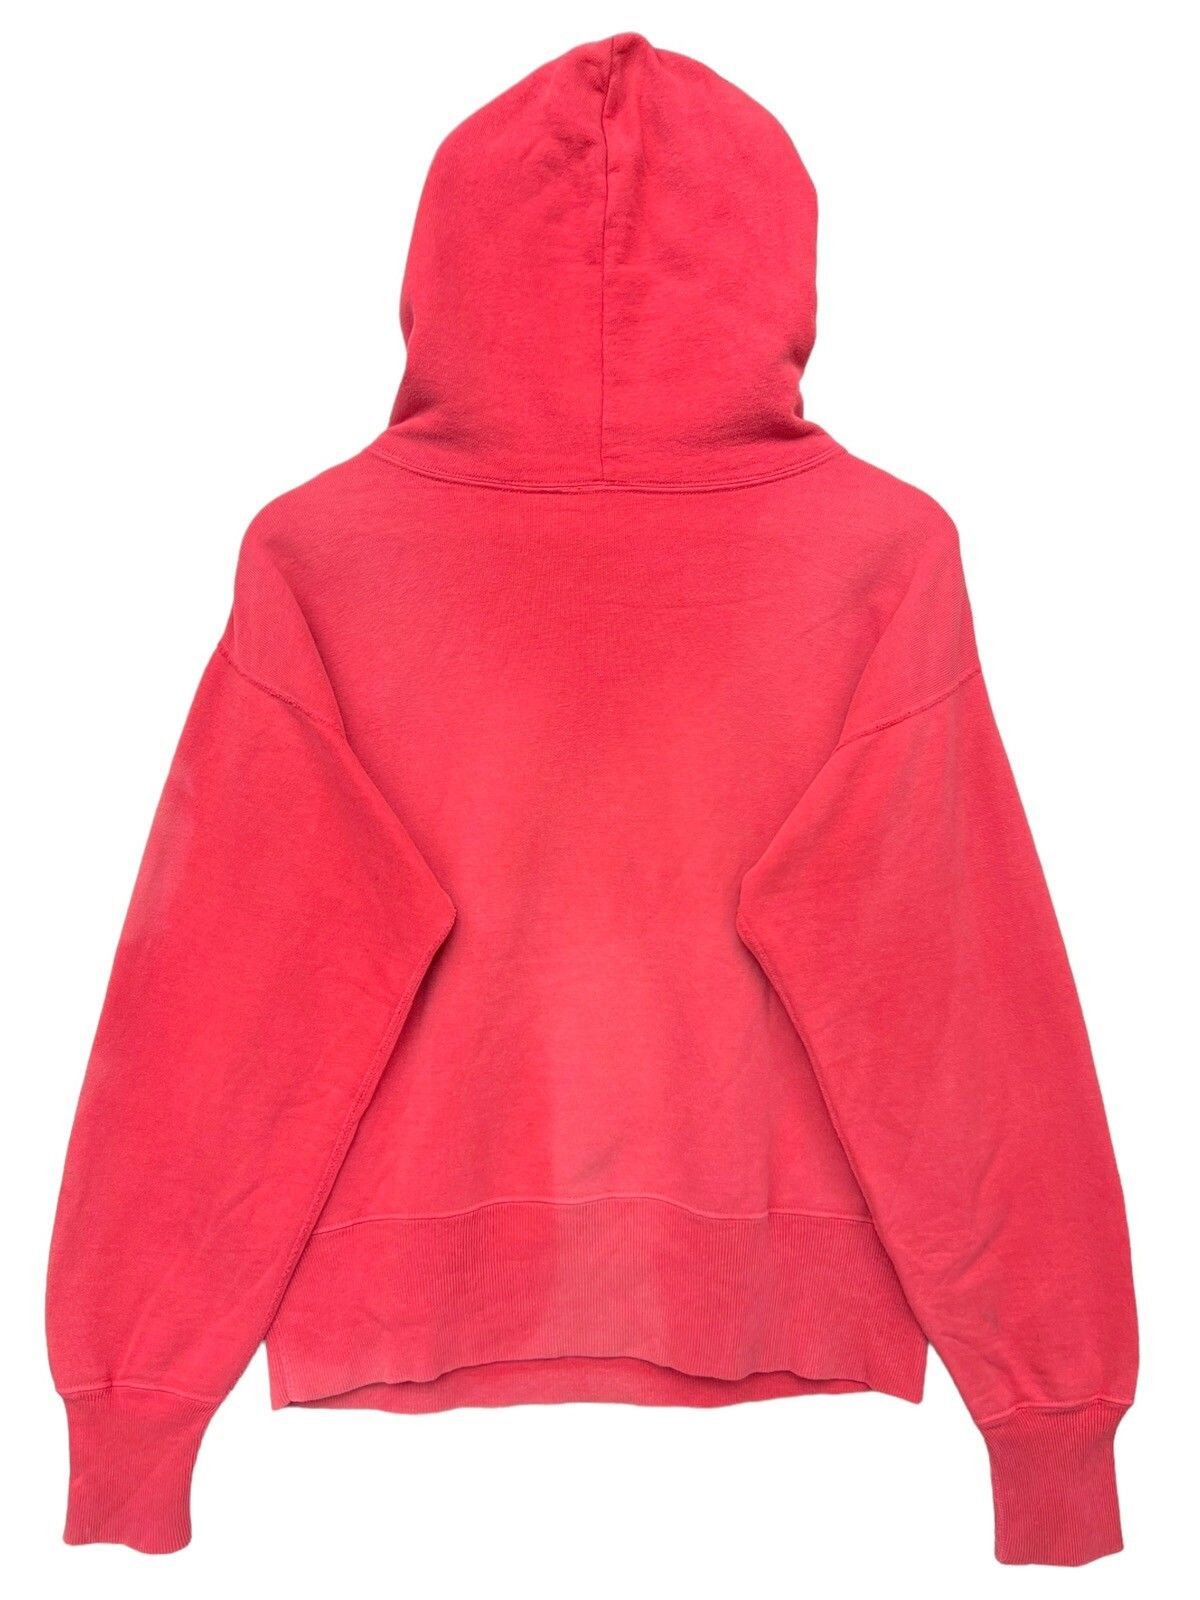 Vintage 45RPM Red Sun Faded Distressed Baggy Boxy Hoodie - 5